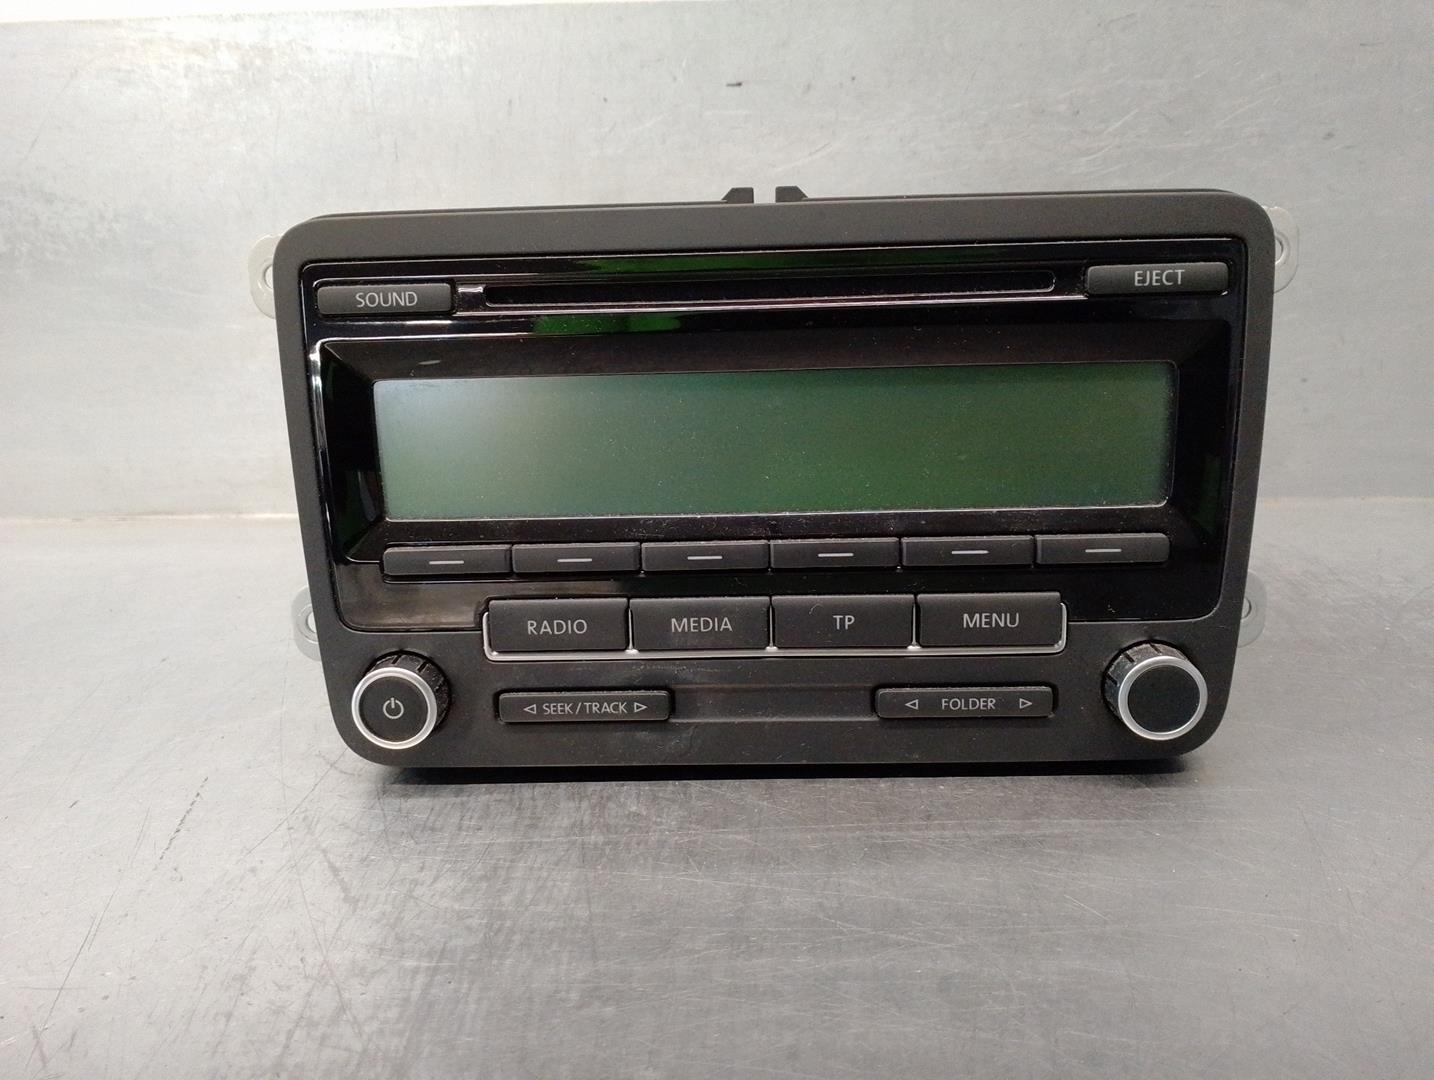 SEAT Leon 2 generation (2005-2012) Music Player Without GPS 5P0035186B, 8157641238366 19900809